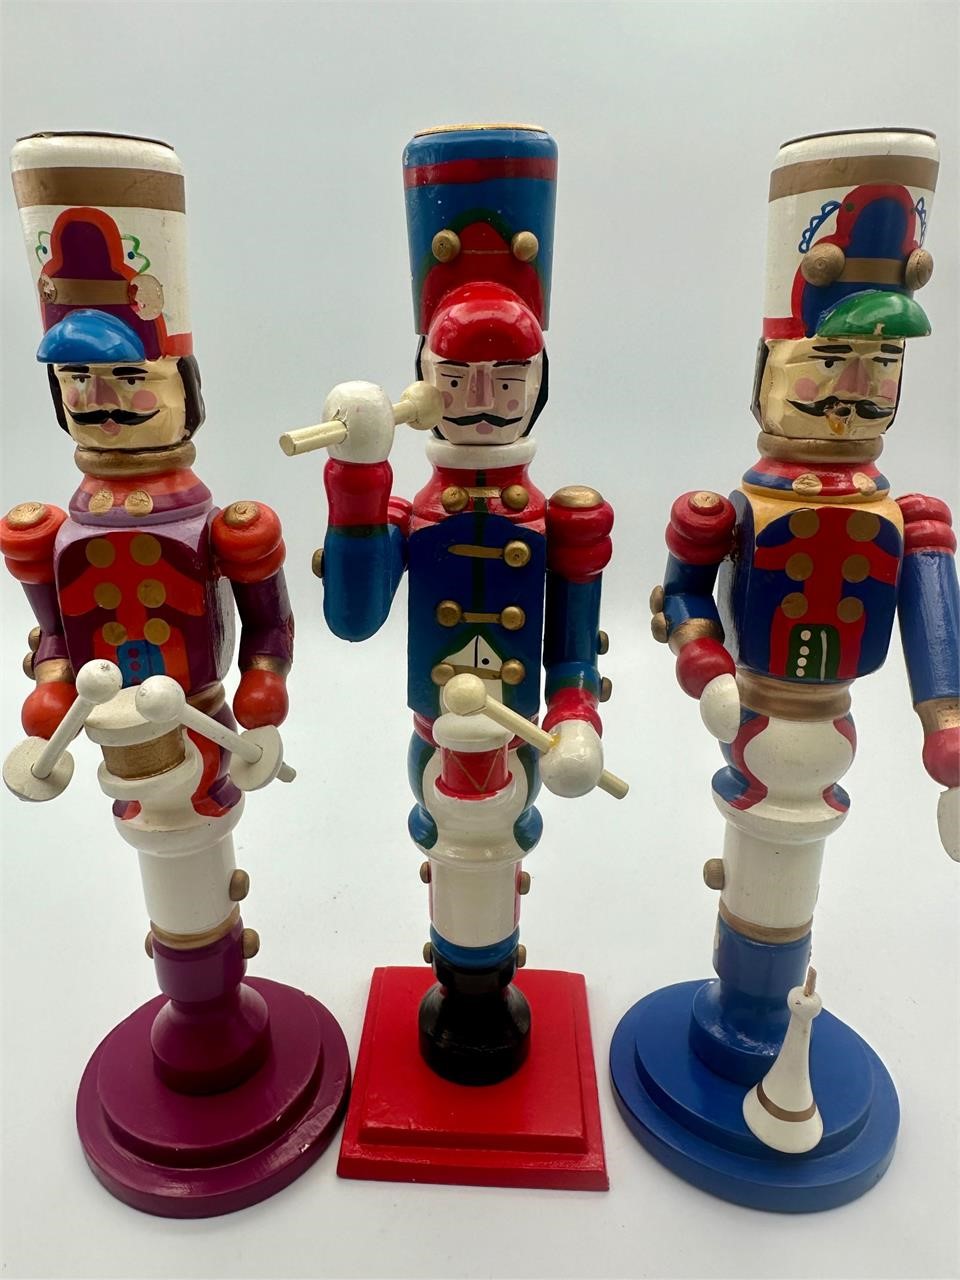 3 10" Wood Soldier Nutcracker Candle Holders